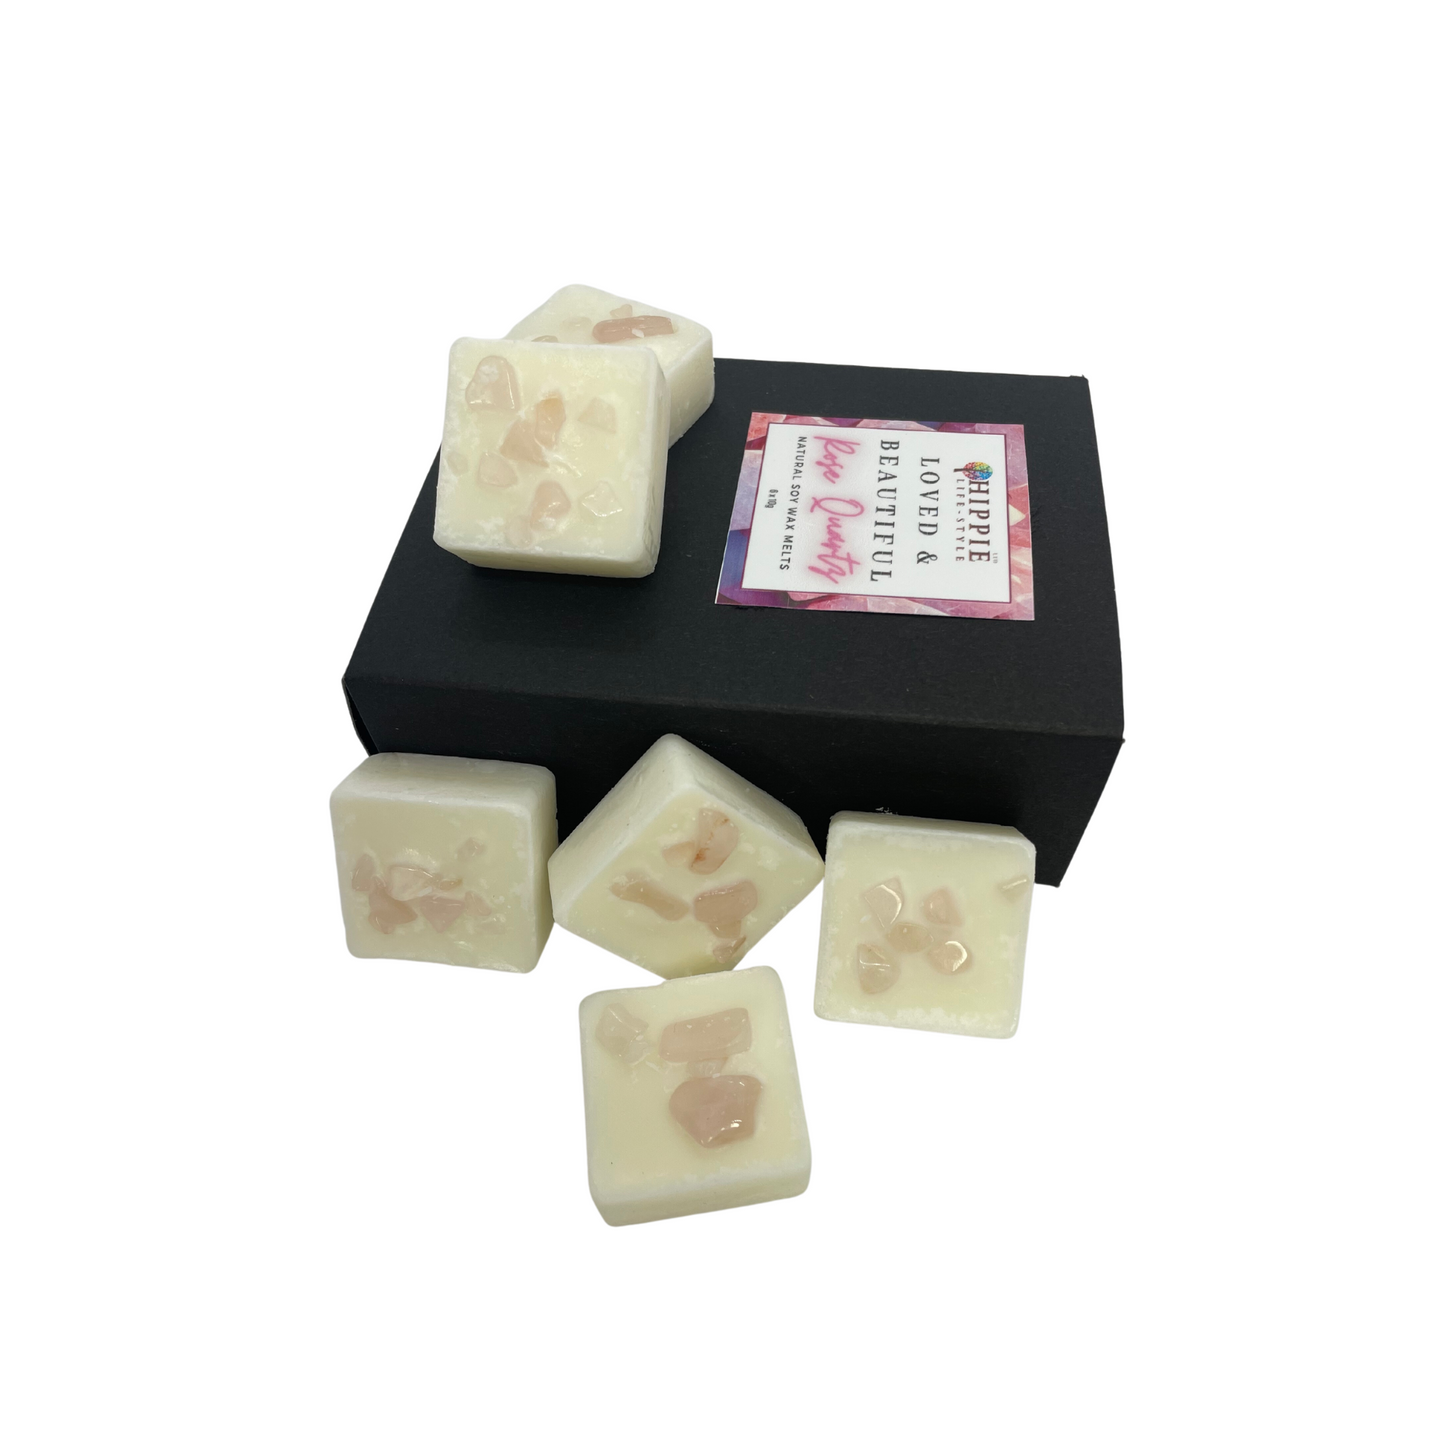 Hippie life UK, the crystal, spiritual and natural holistic health gift shop presents “Loved and Beautiful” wax melts, , HIPPIE Life UK, , , , , .